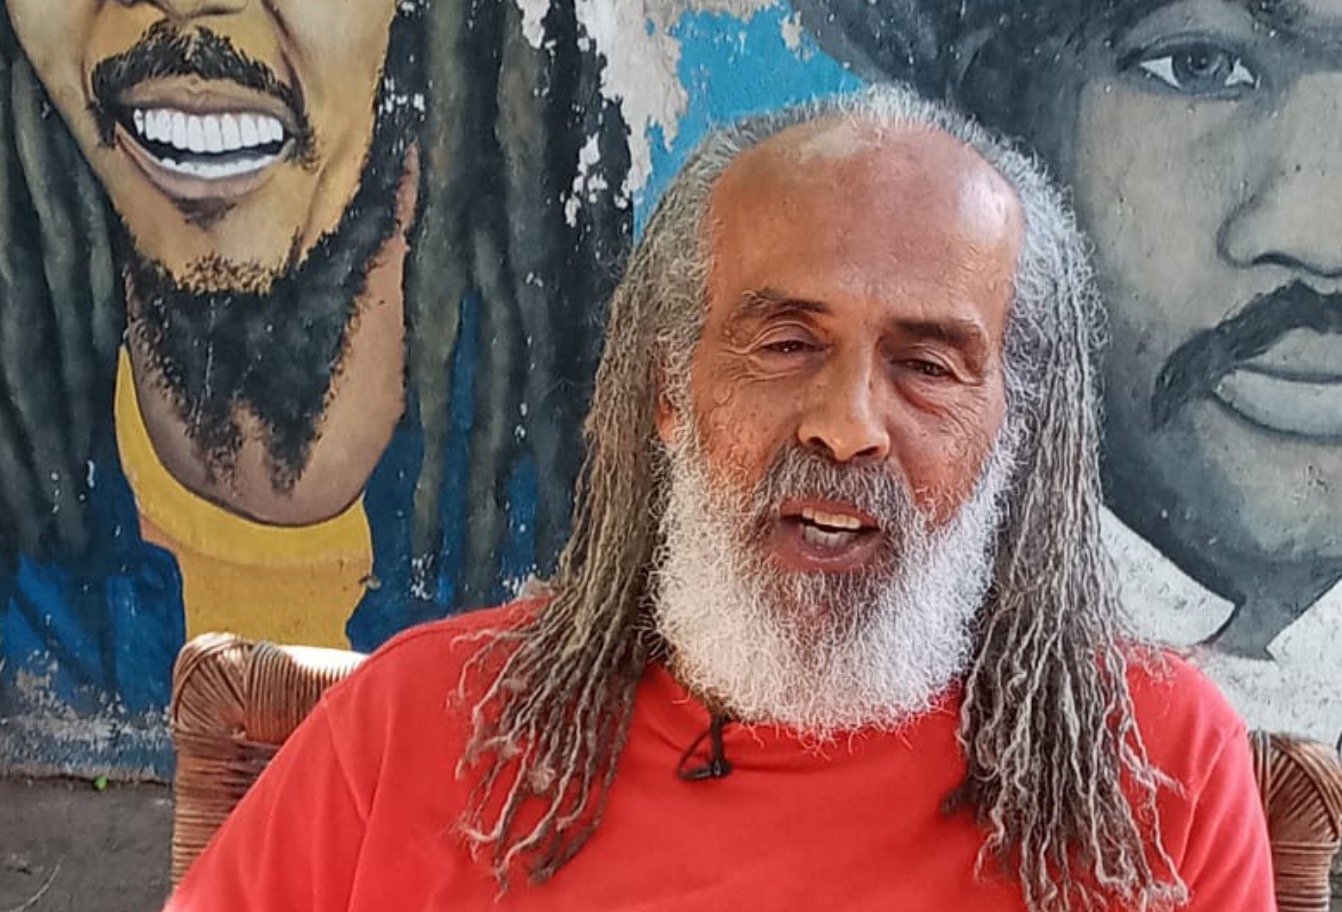 'Skill' Cole Talks More on Bob Marley's Relationship with Cindy, Peter Tosh, Bunny Wailer, Lee 'Scratch' Perry and the